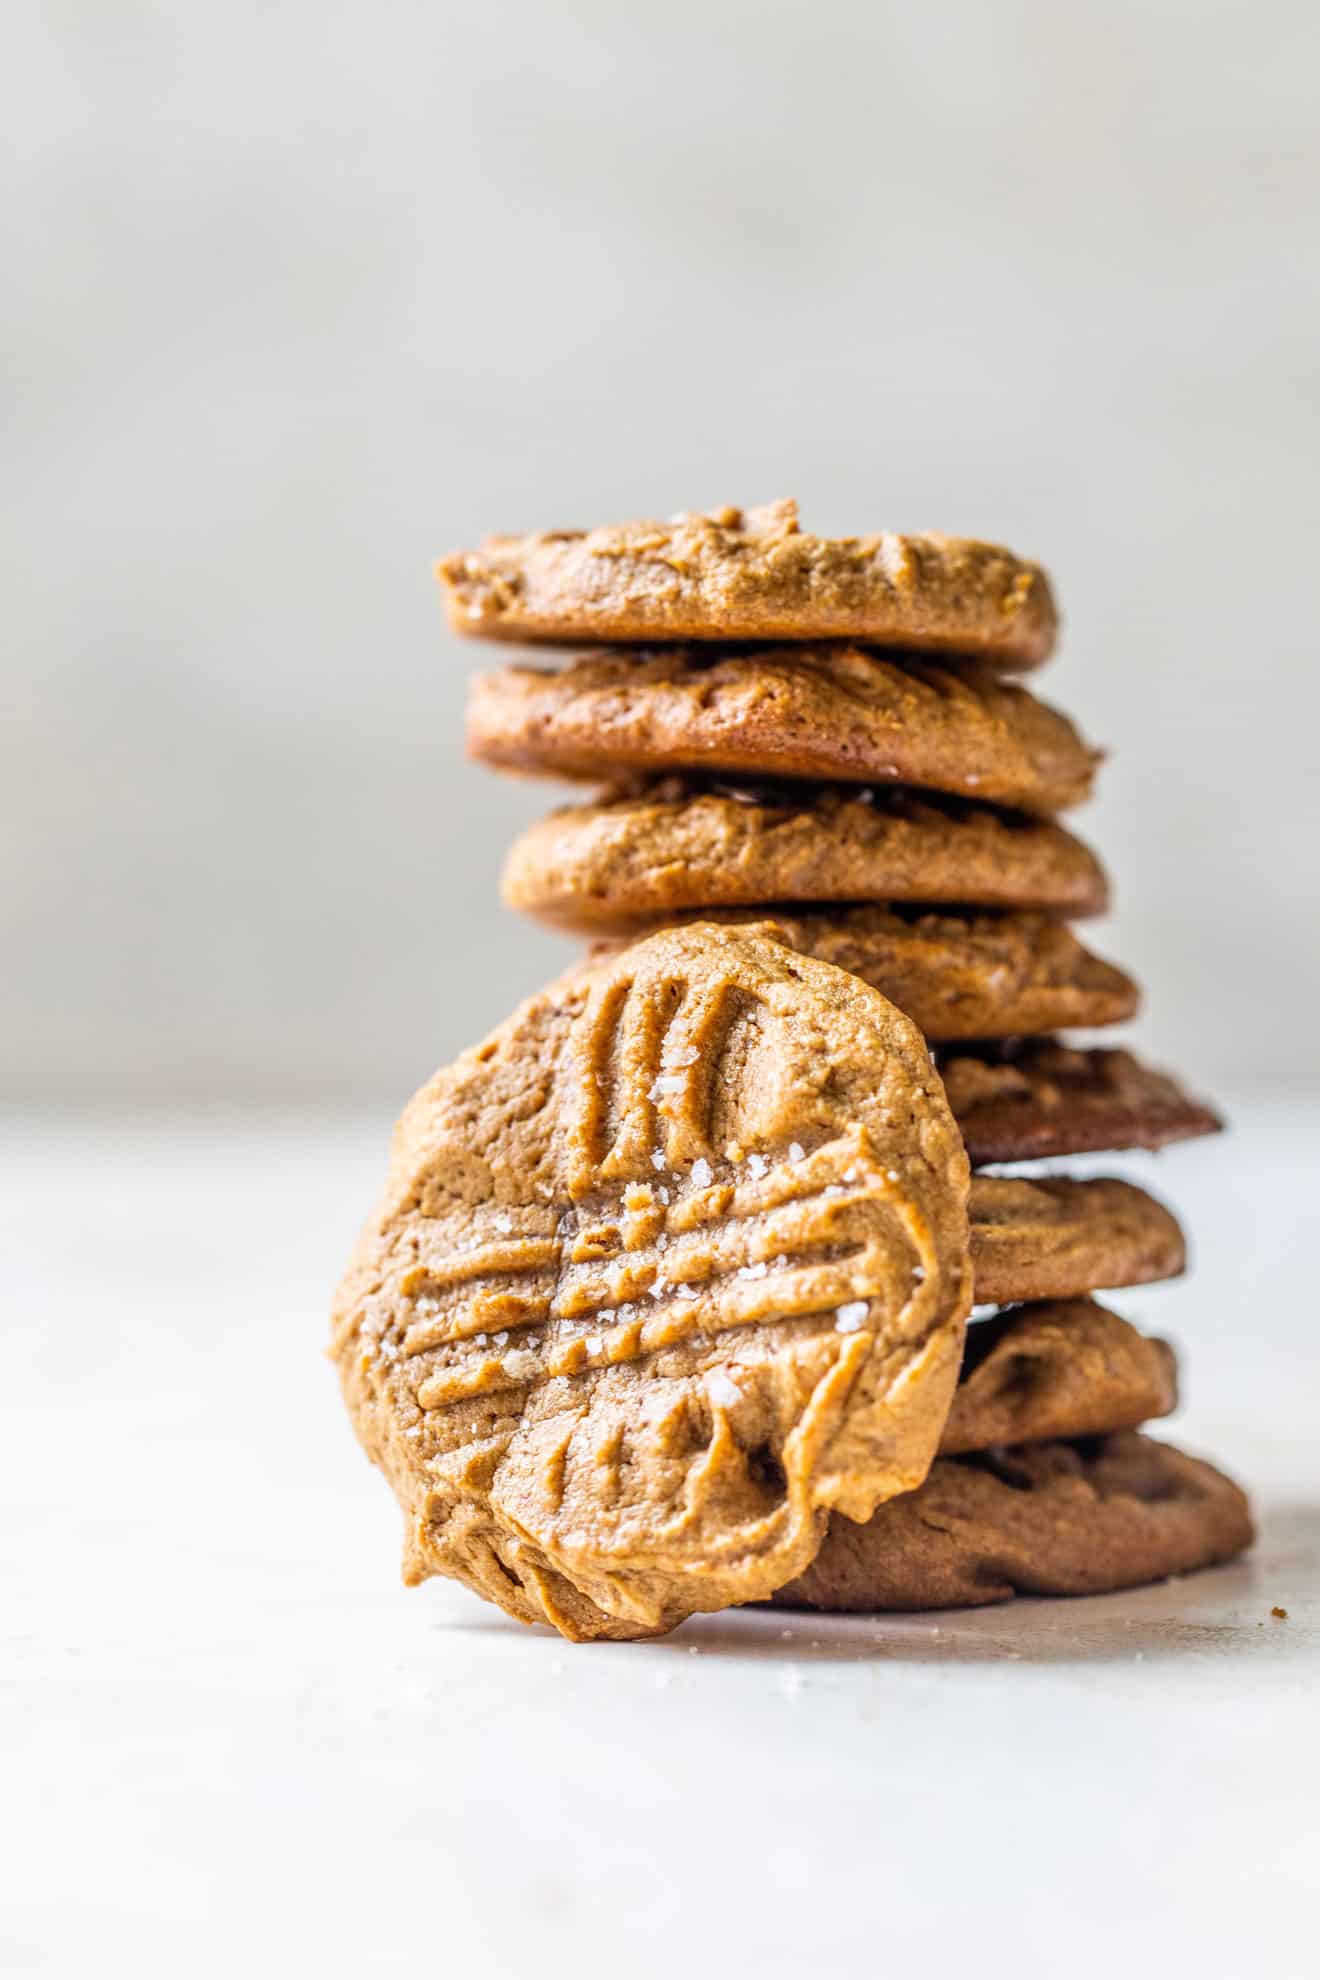 This is a side view of a stack of peanut butter cookies sitting on a white counter and a white background. One cookie leans against the stack of cookies. 